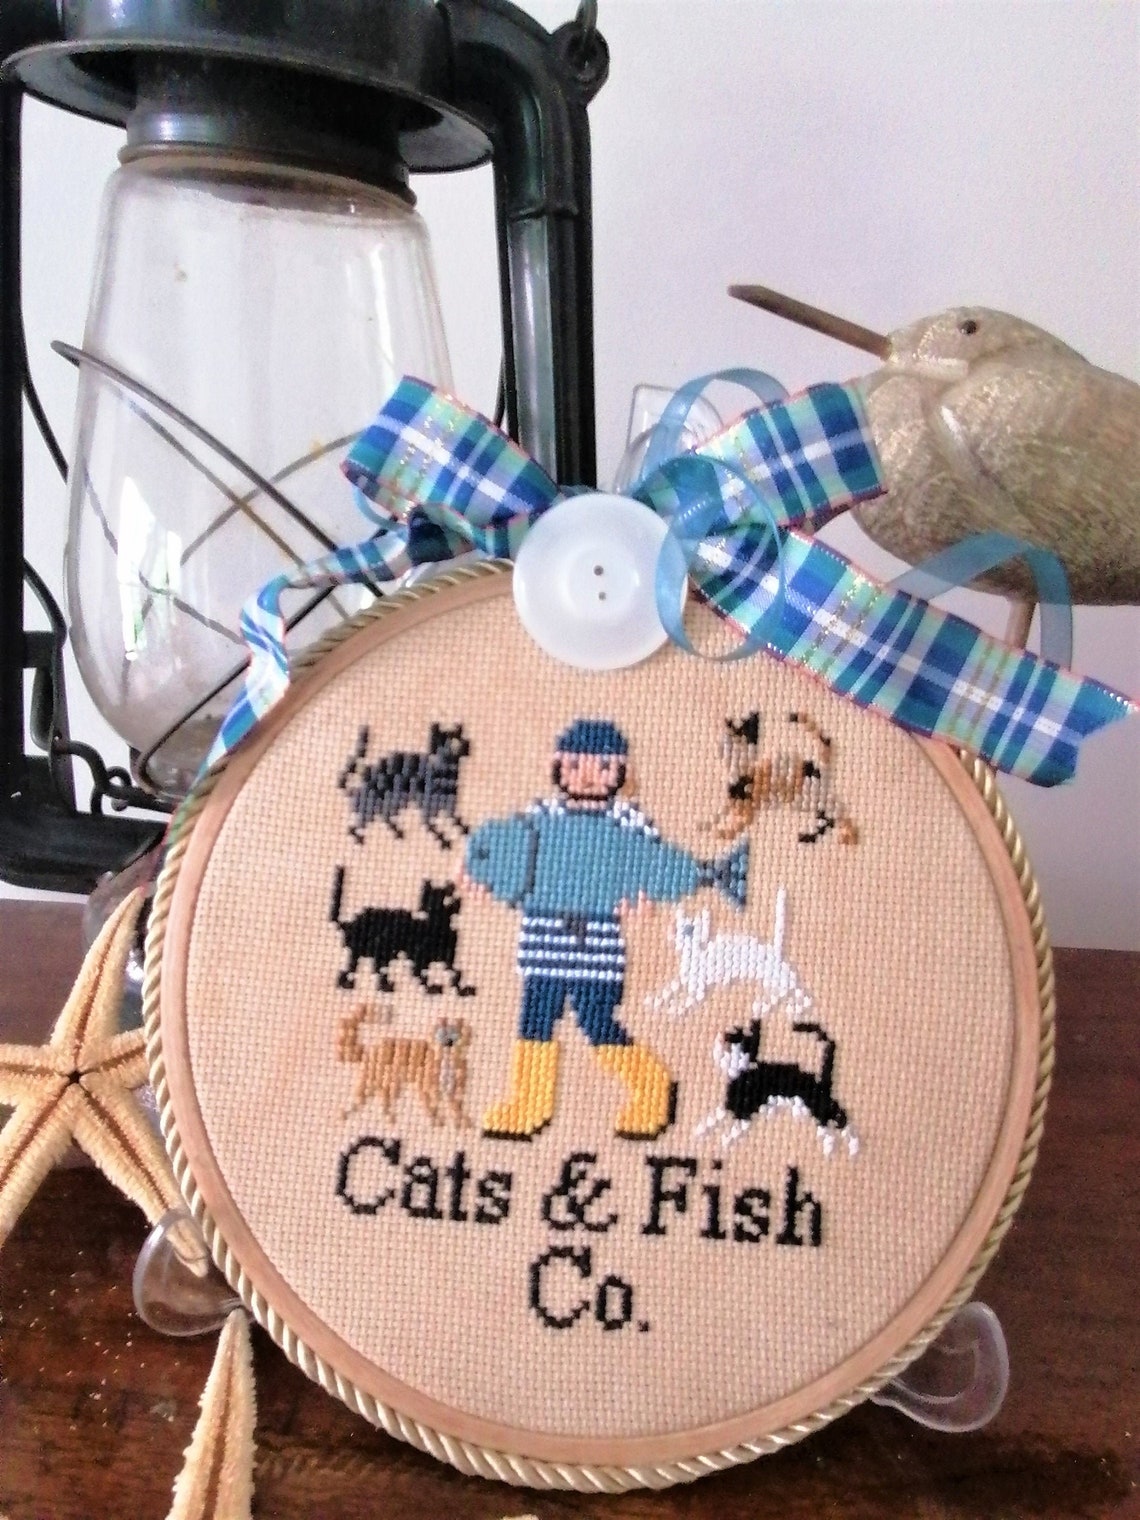 TPP - Cats And Fish Co